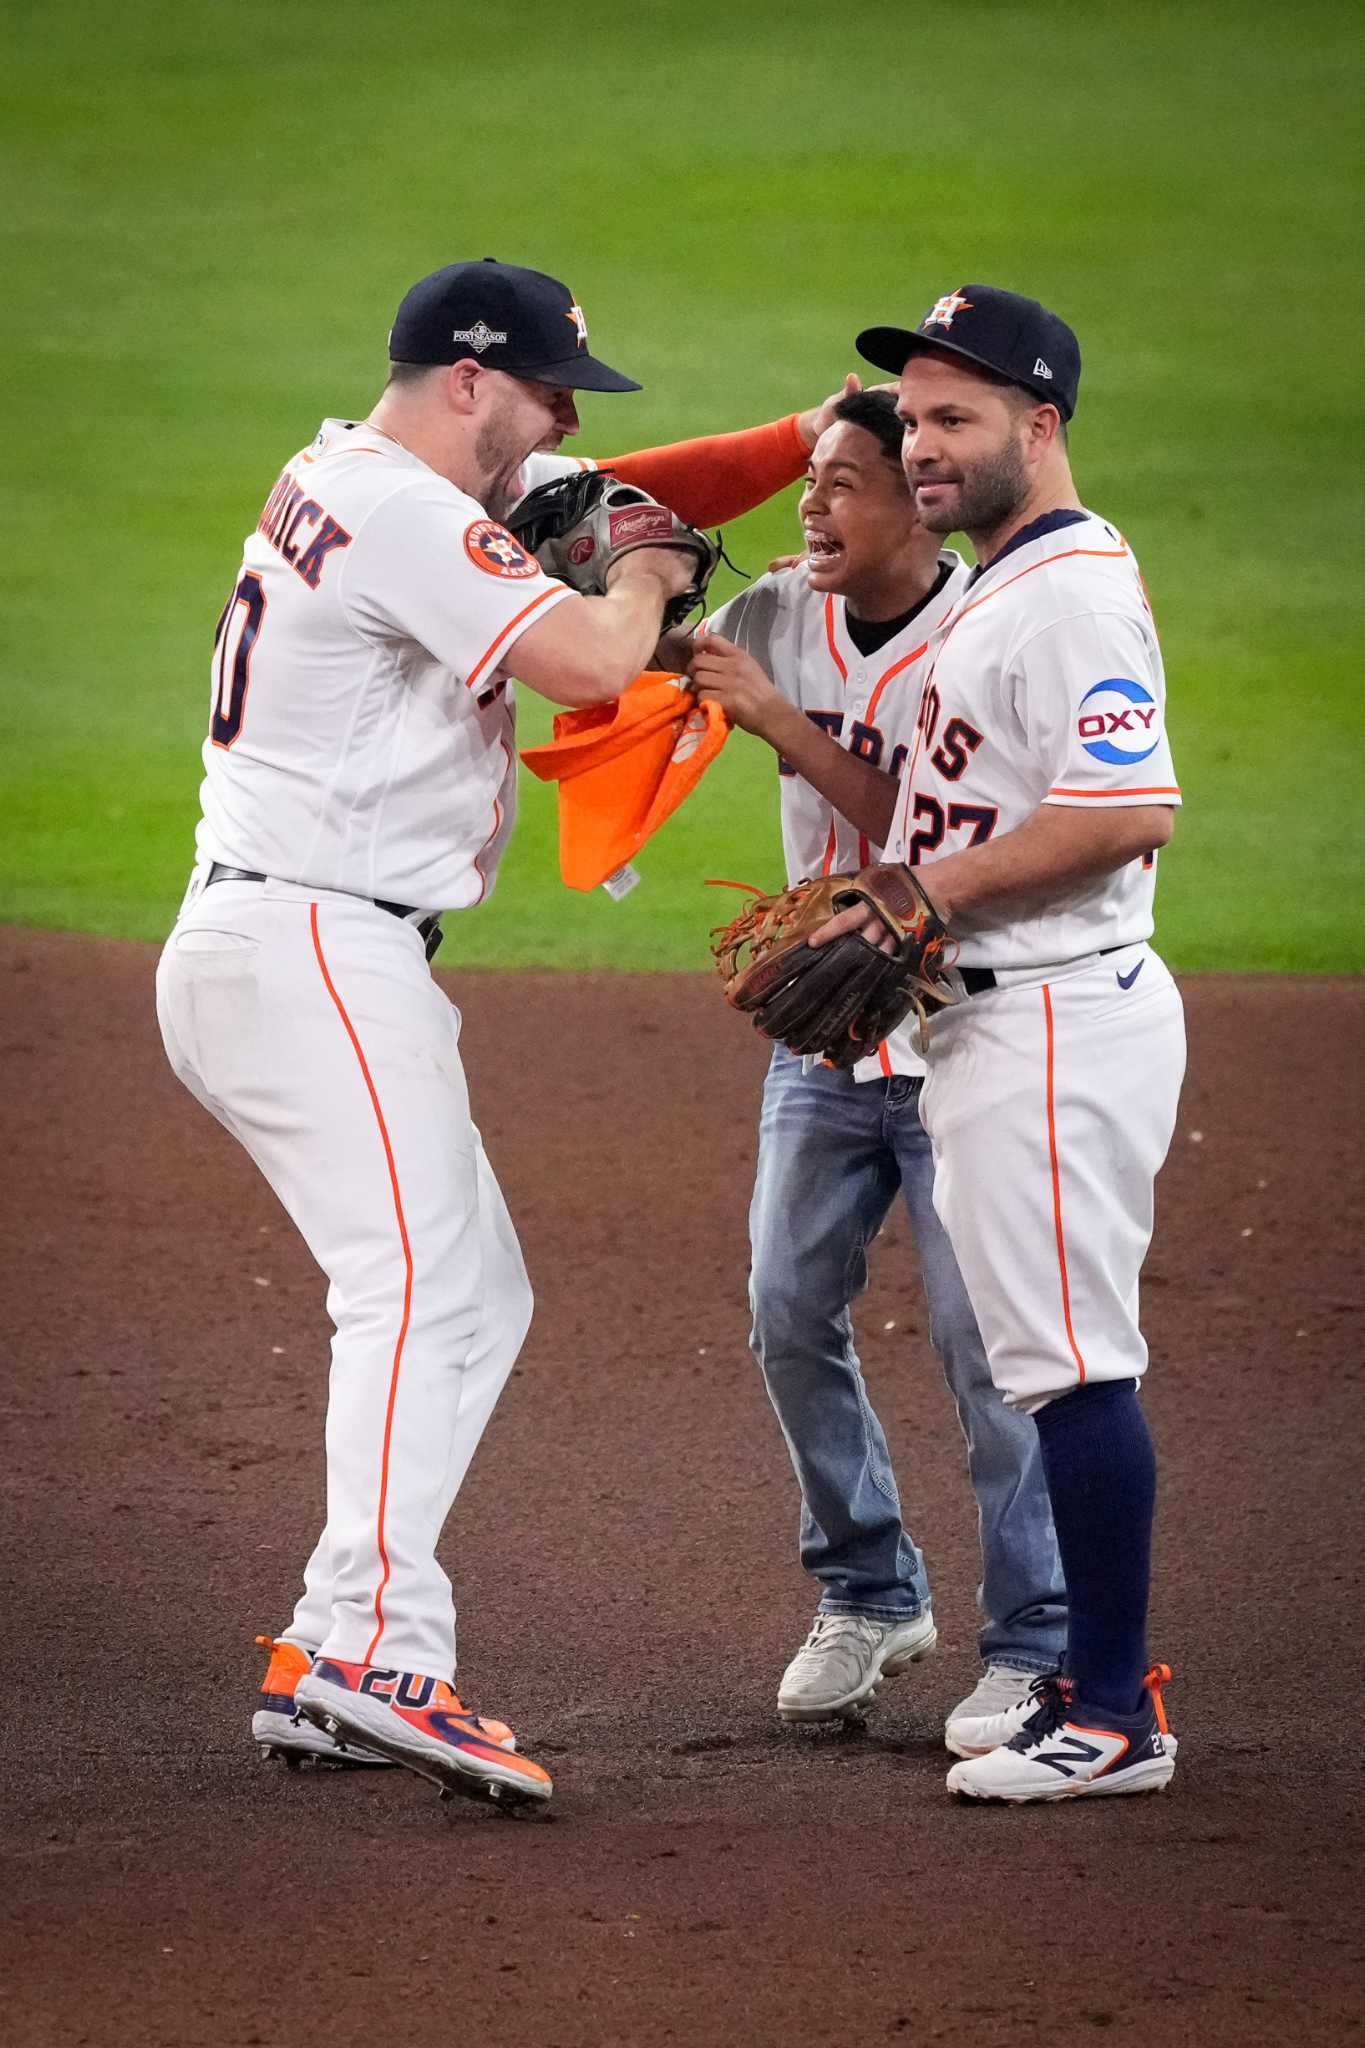 The Pen: How did the Astros wind up with baseball's best-dressed fans?